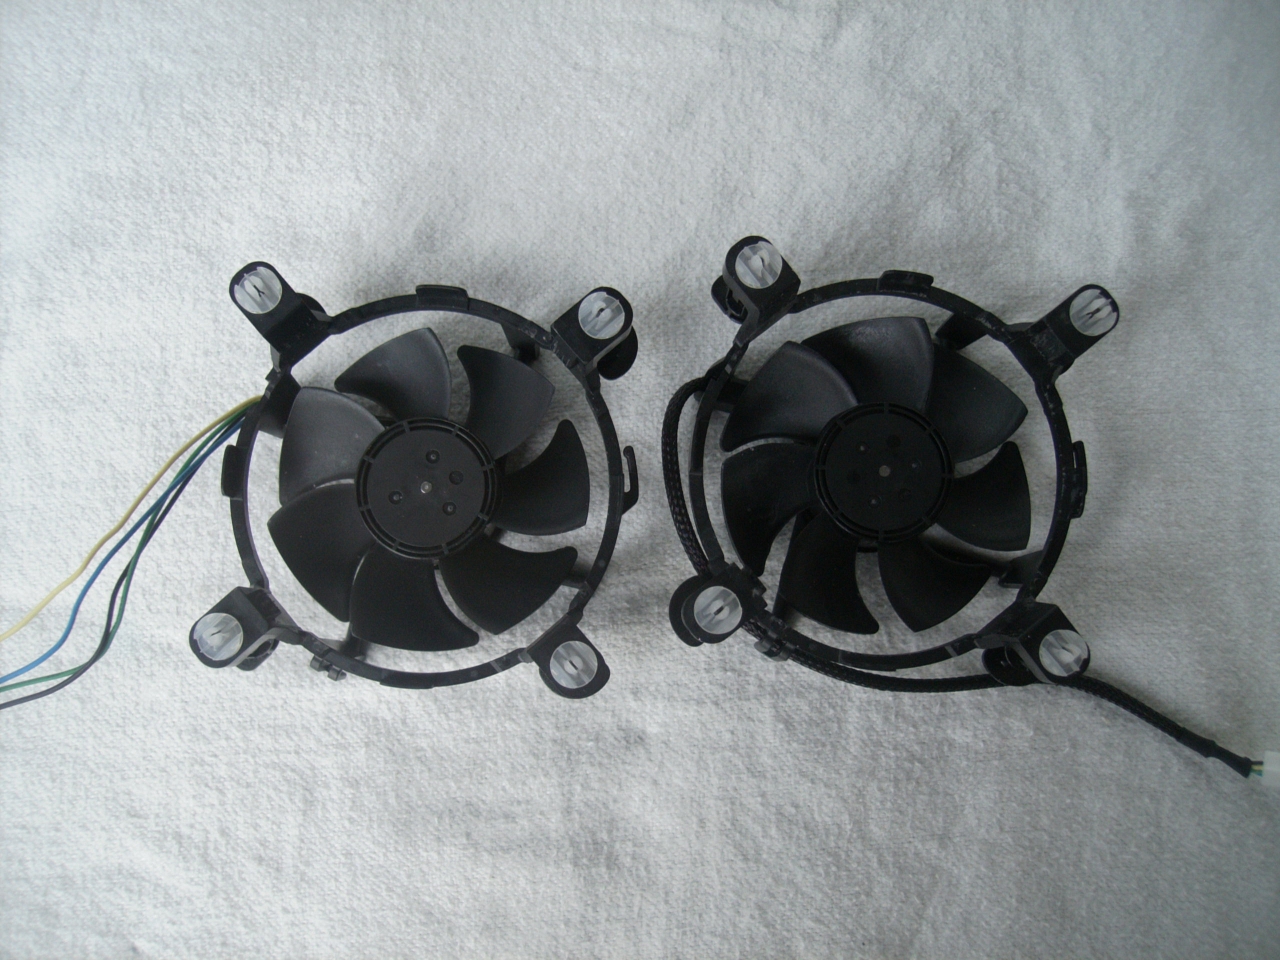 The low end cooler 7-blade fan is rated for 0.2 amps at 12 volts. At full throttle, this fan spins at 3,000 RPM. At their thickest, the blades measure 3mm. The fan itself is 26 mm thick, excluding the cooler mounts. The higher end cooler fan has a rating of 0.28 amps at 12 volts, slightly higher than the all-aluminium cooler's fan. Oddly, it has the same maximum speed, 3,000 RPM. The overall dimensions are the same, except for the fin thickness and the core. The impeller blades are noticeable thicker than the other cooler, up to 3.5mm thick, and thicker for a larger section of each blade.